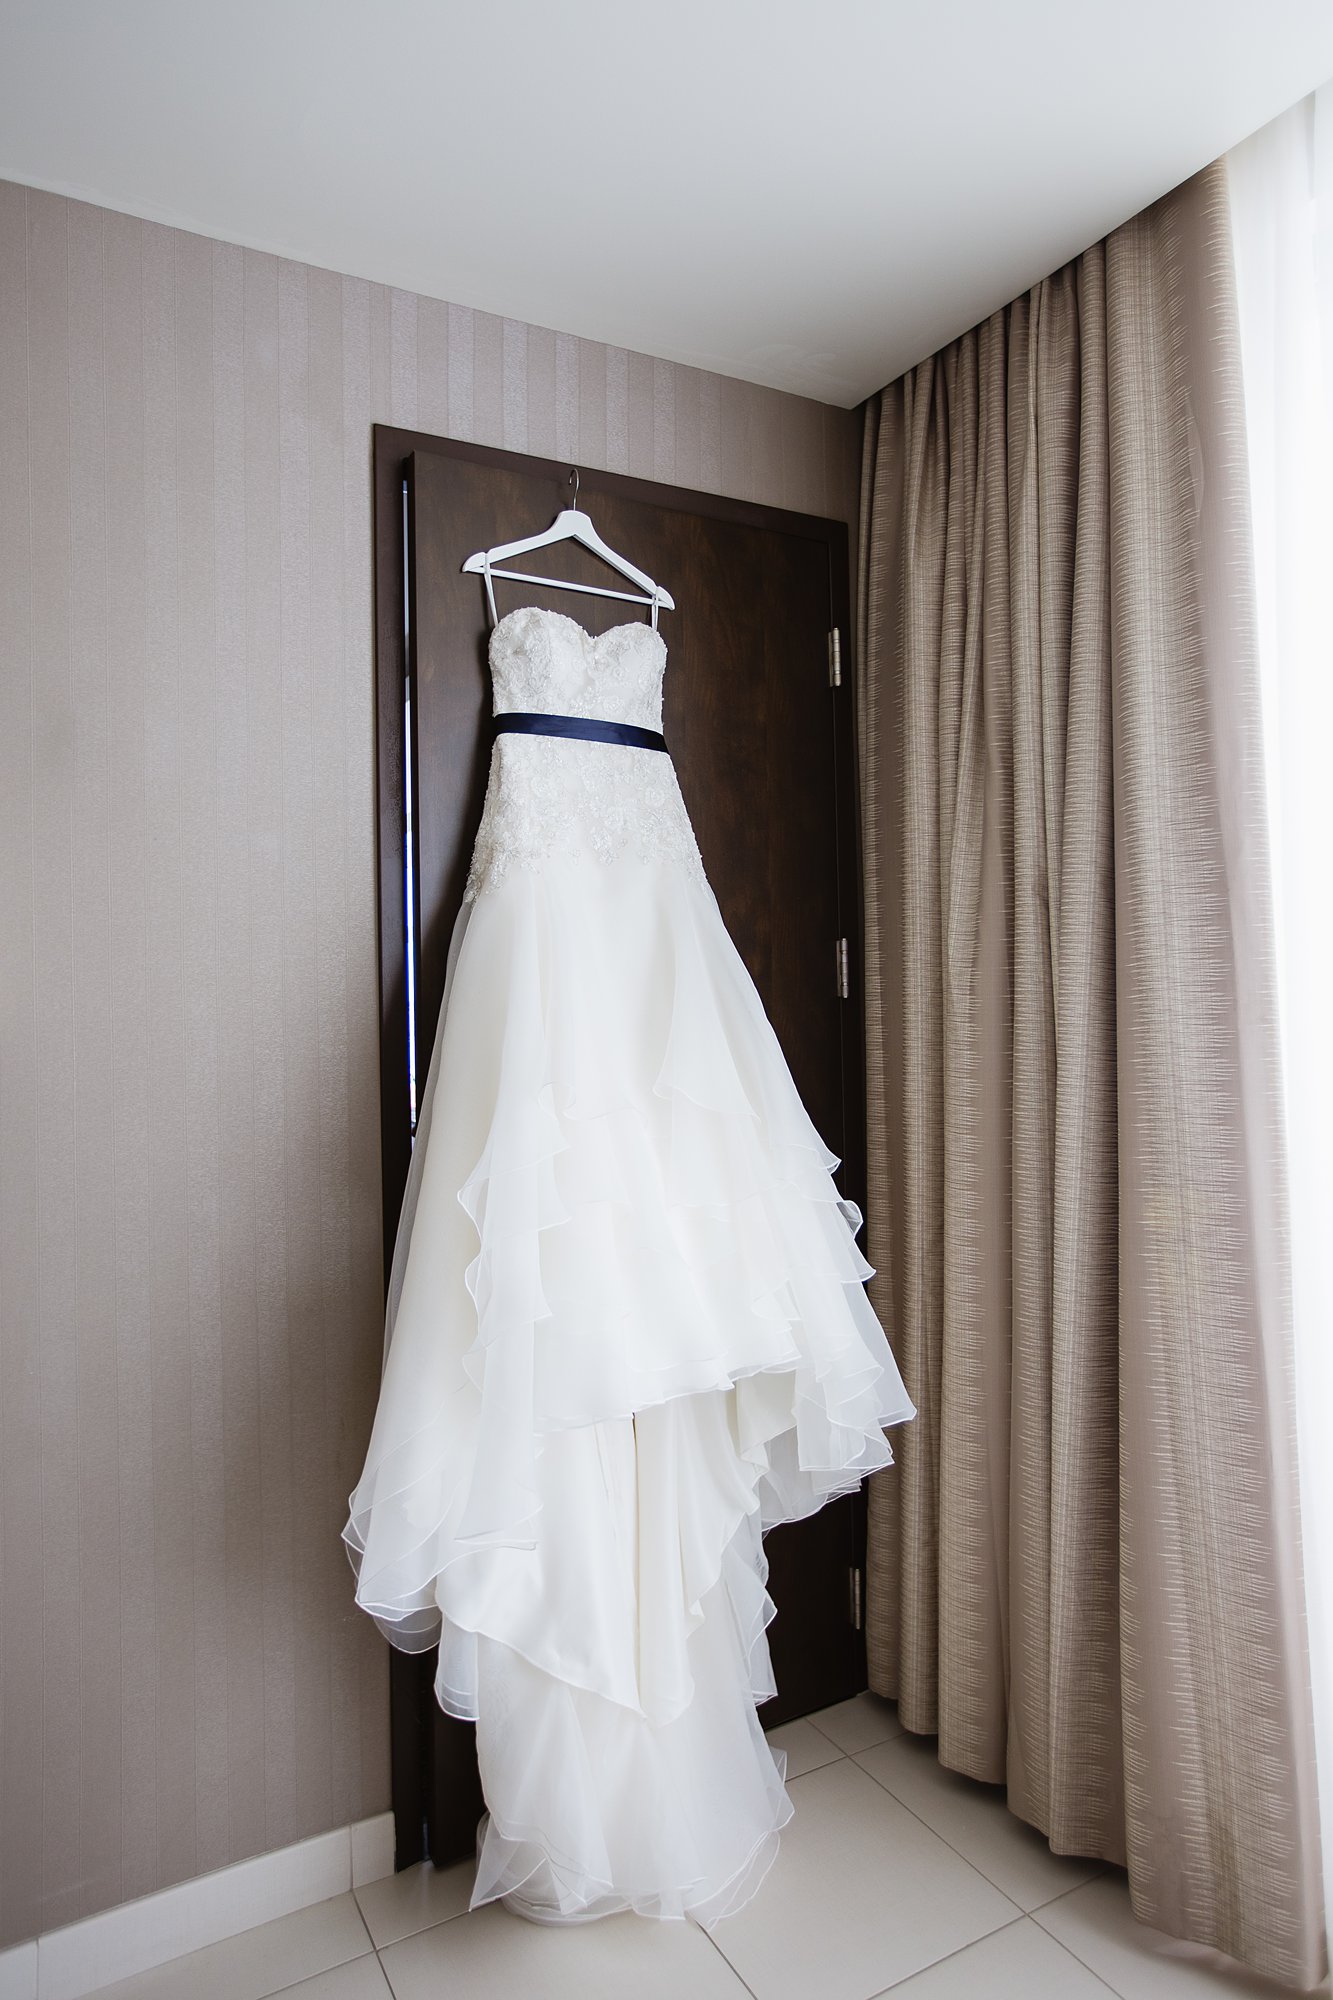 Bride's simple white dress hanging in hotel room.